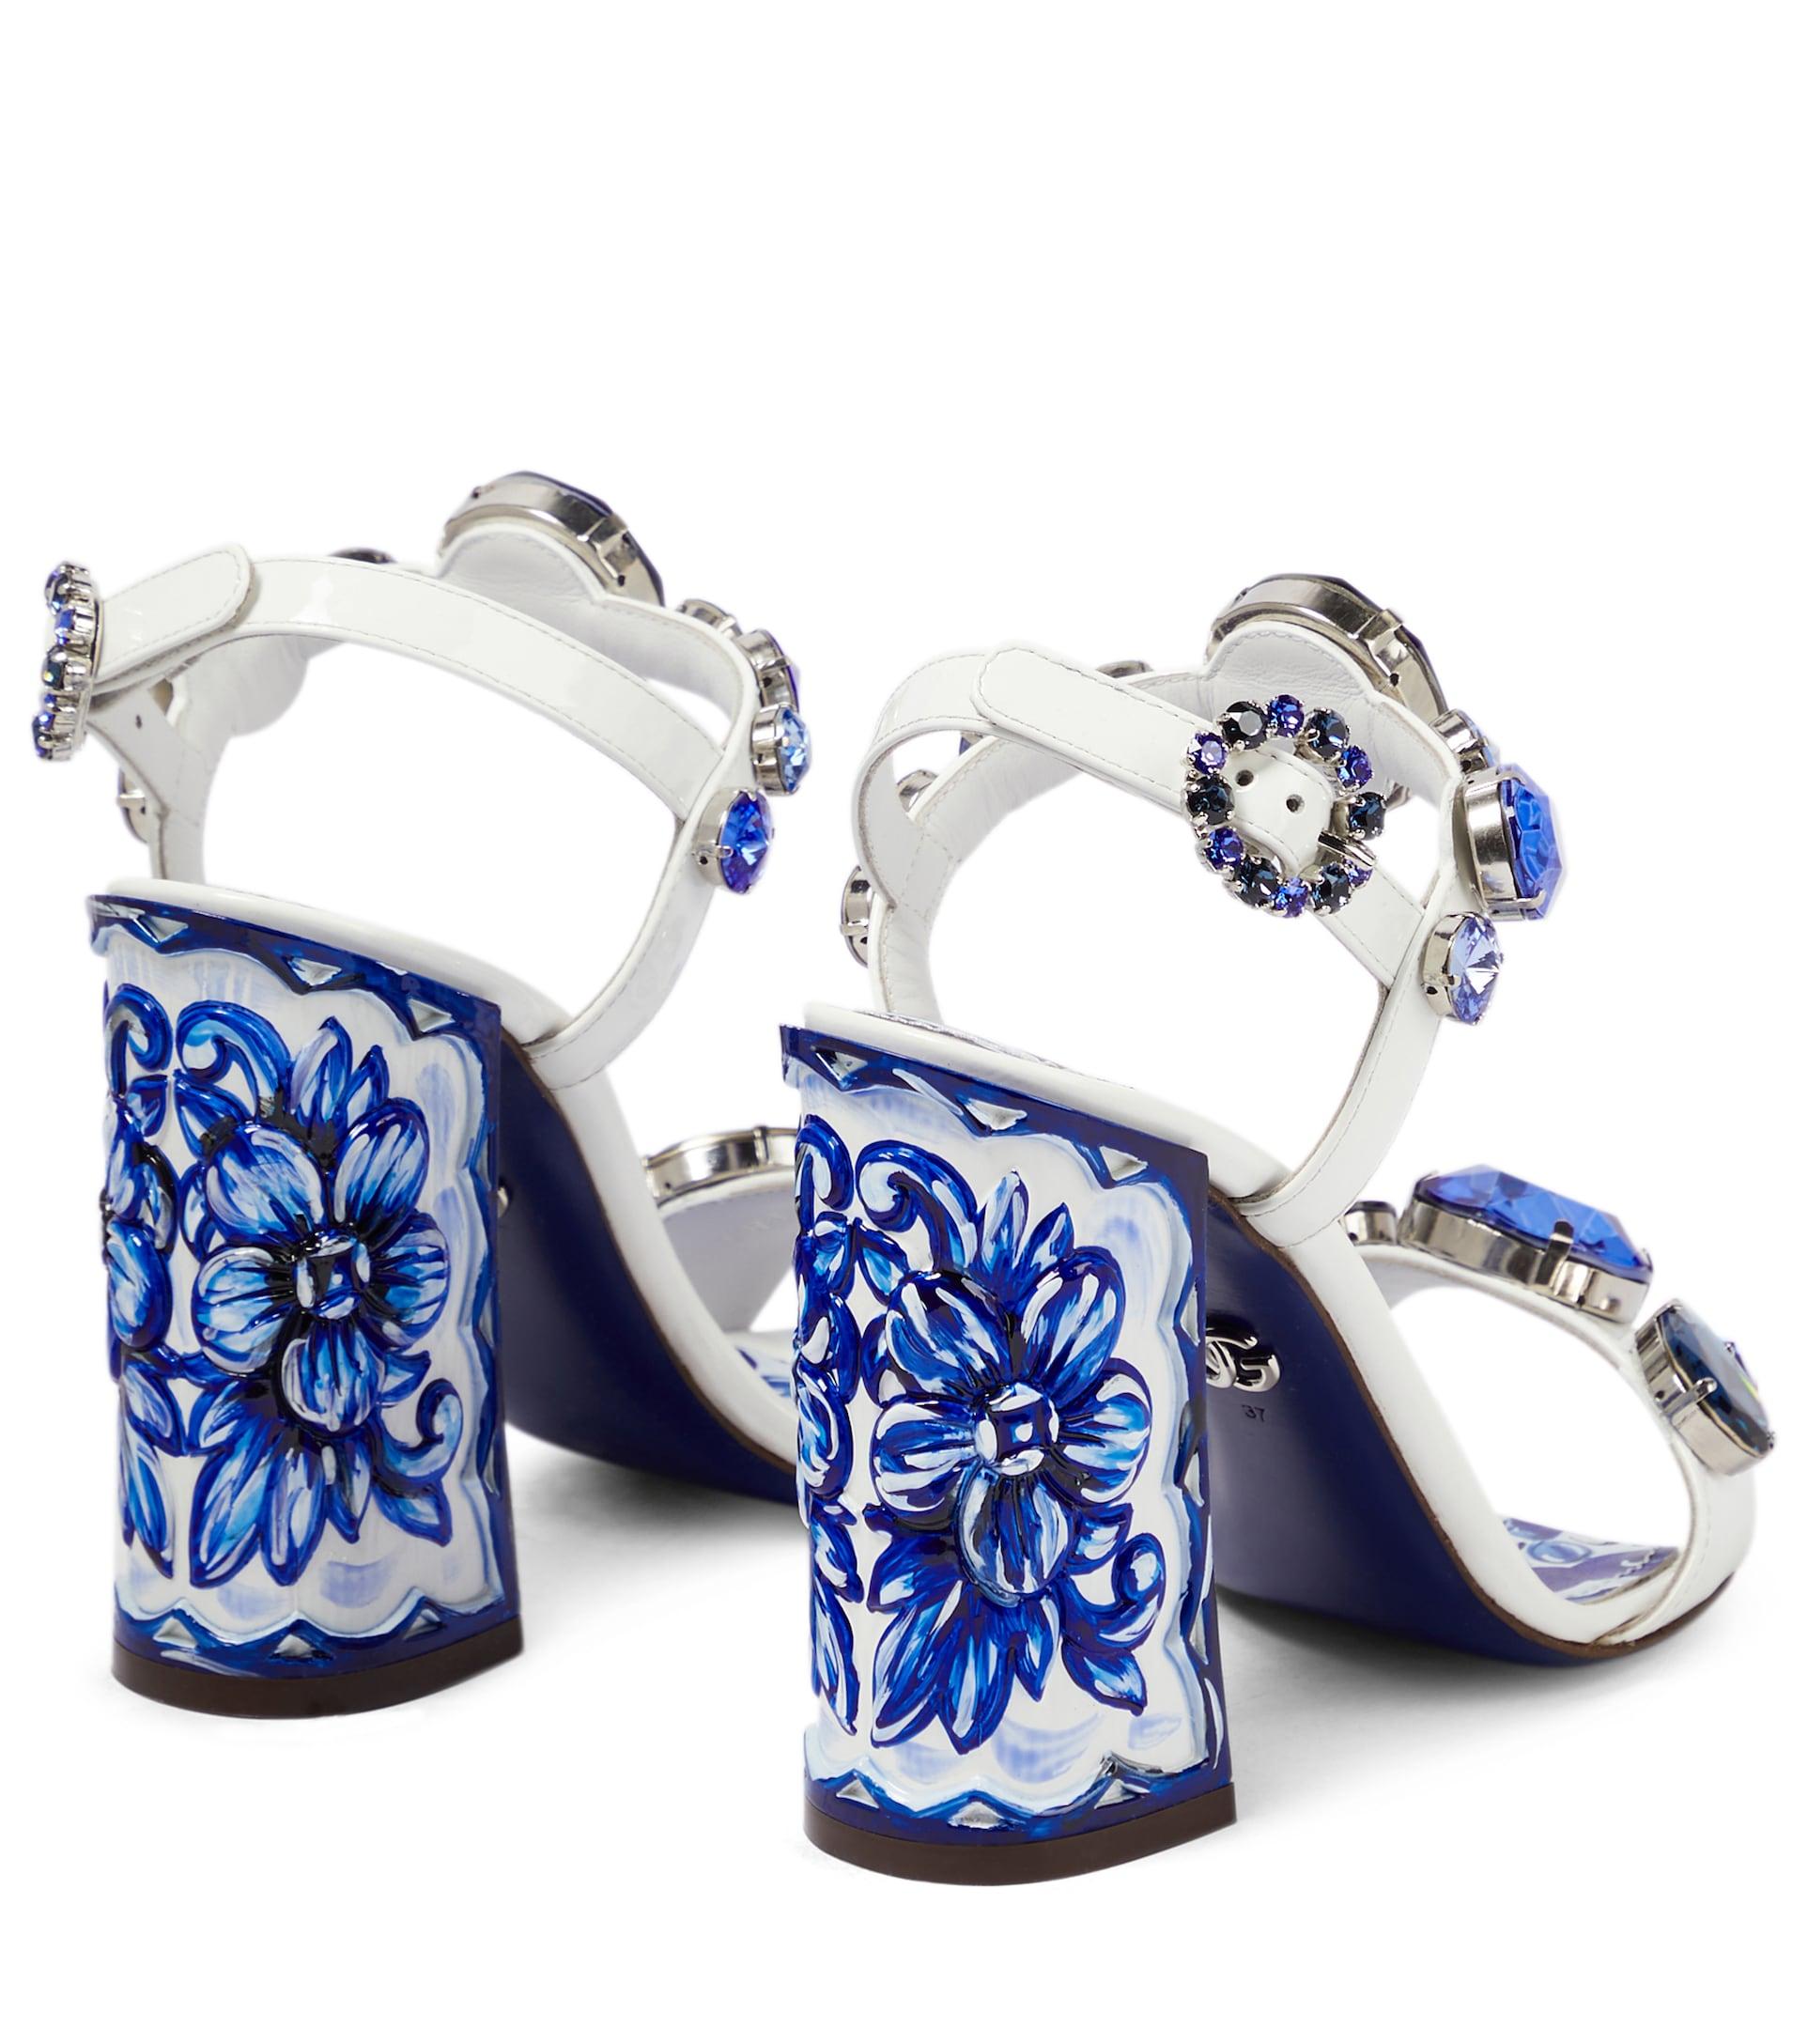 Dolce & Gabbana Majolica Embellished Leather Sandals in Blue | Lyst